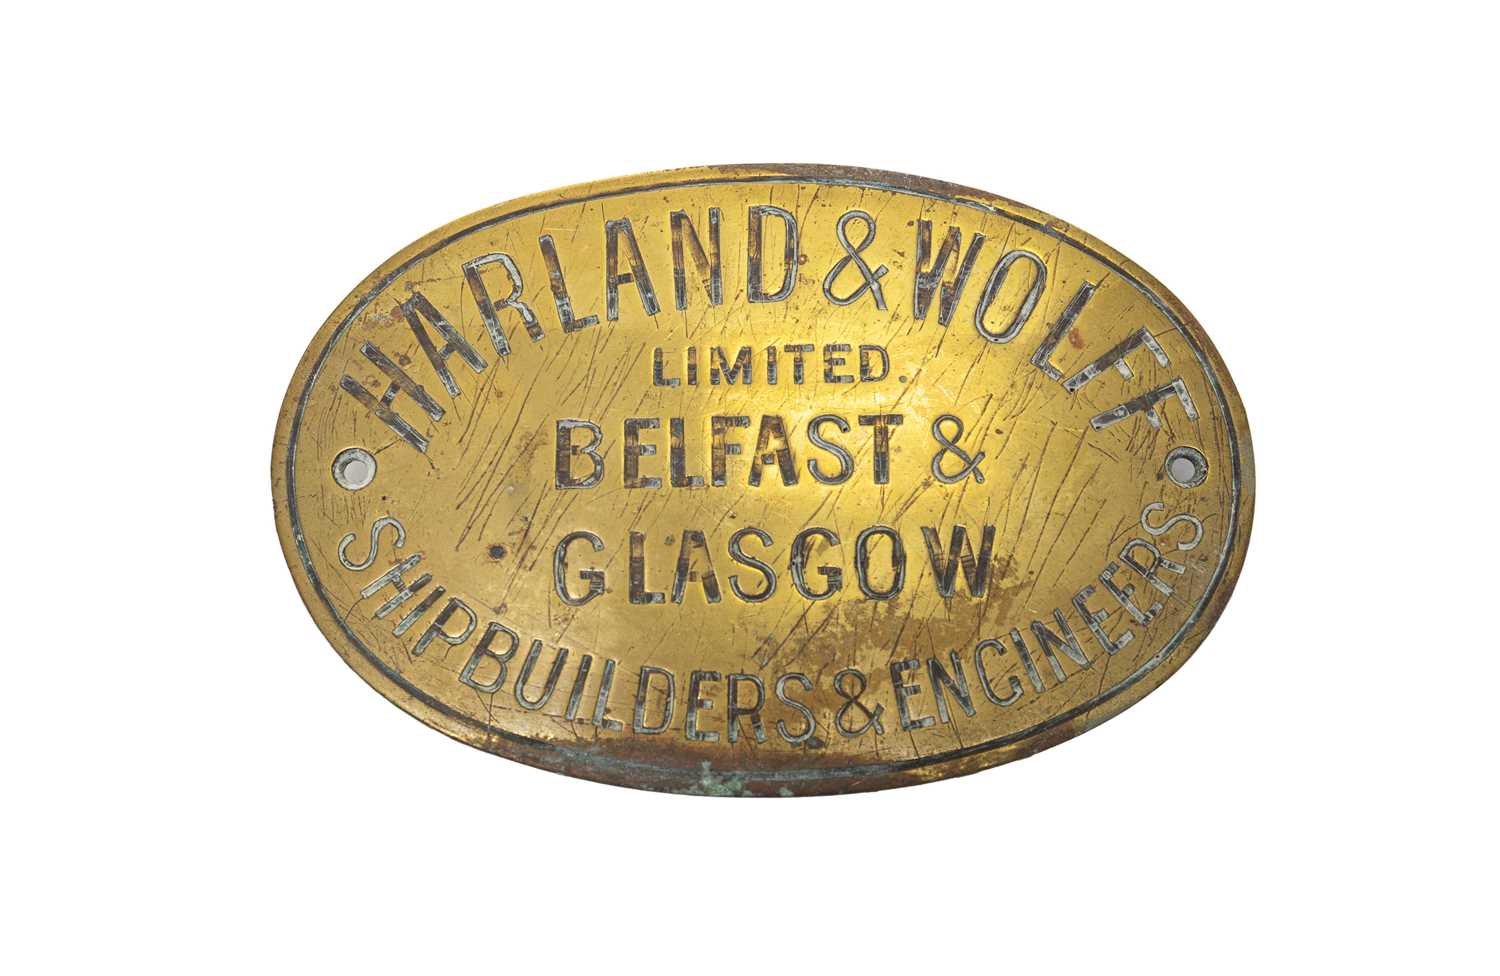 Lot 3197 - Harland & Wolff Two Oval Shipbuilders Plates